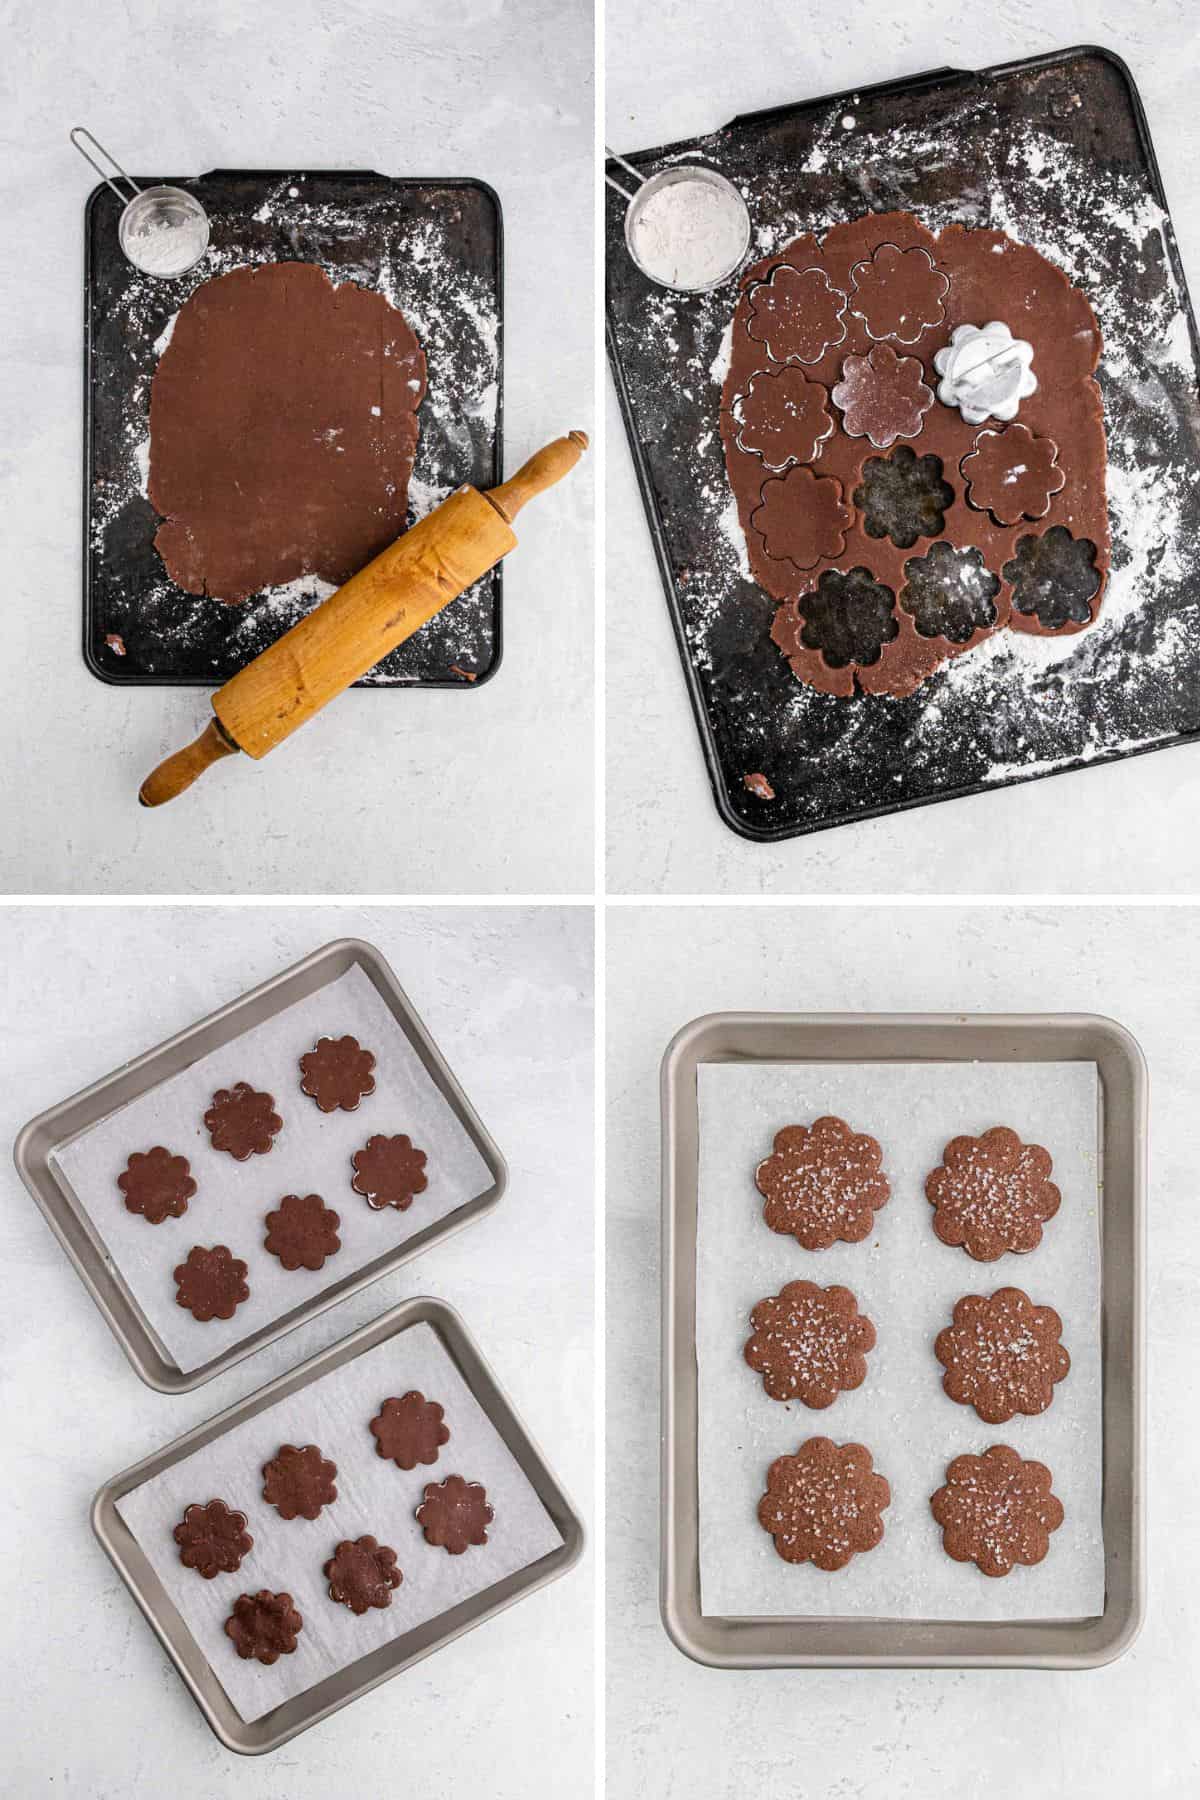 Collage of images showing the steps to roll out and cut the chocolate sugar cookie dough